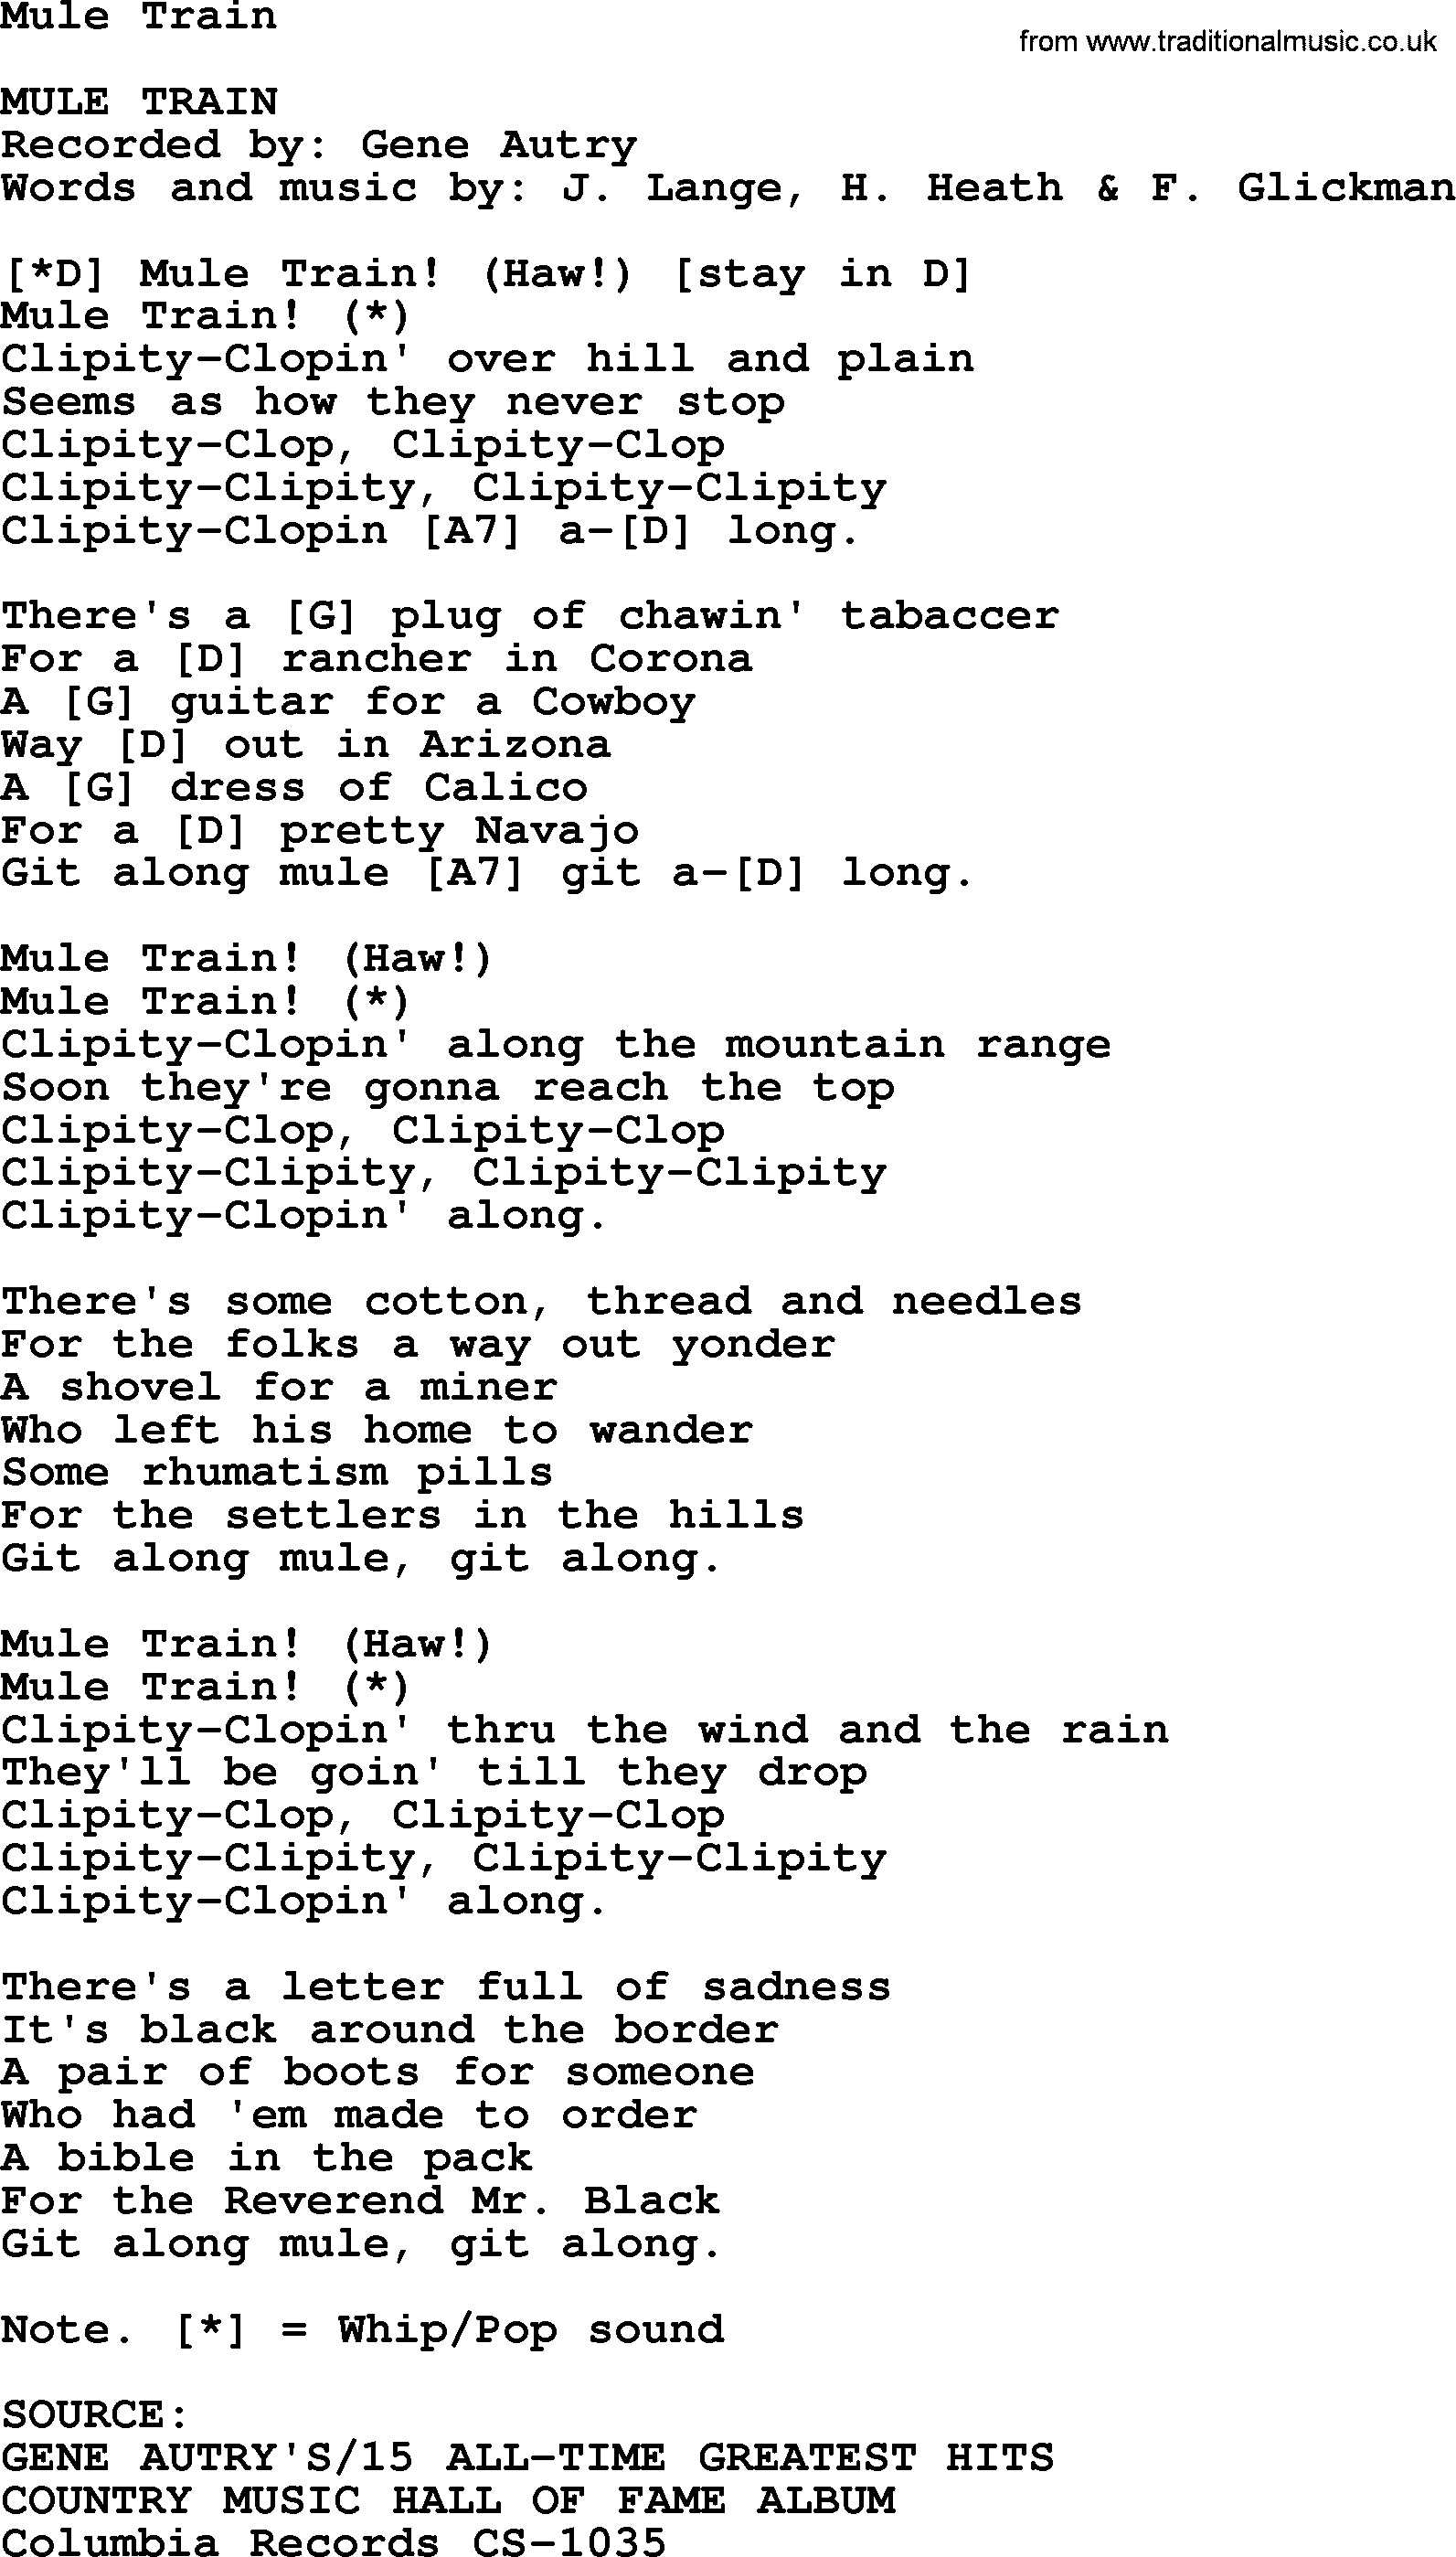 Bluegrass song: Mule Train, lyrics and chords